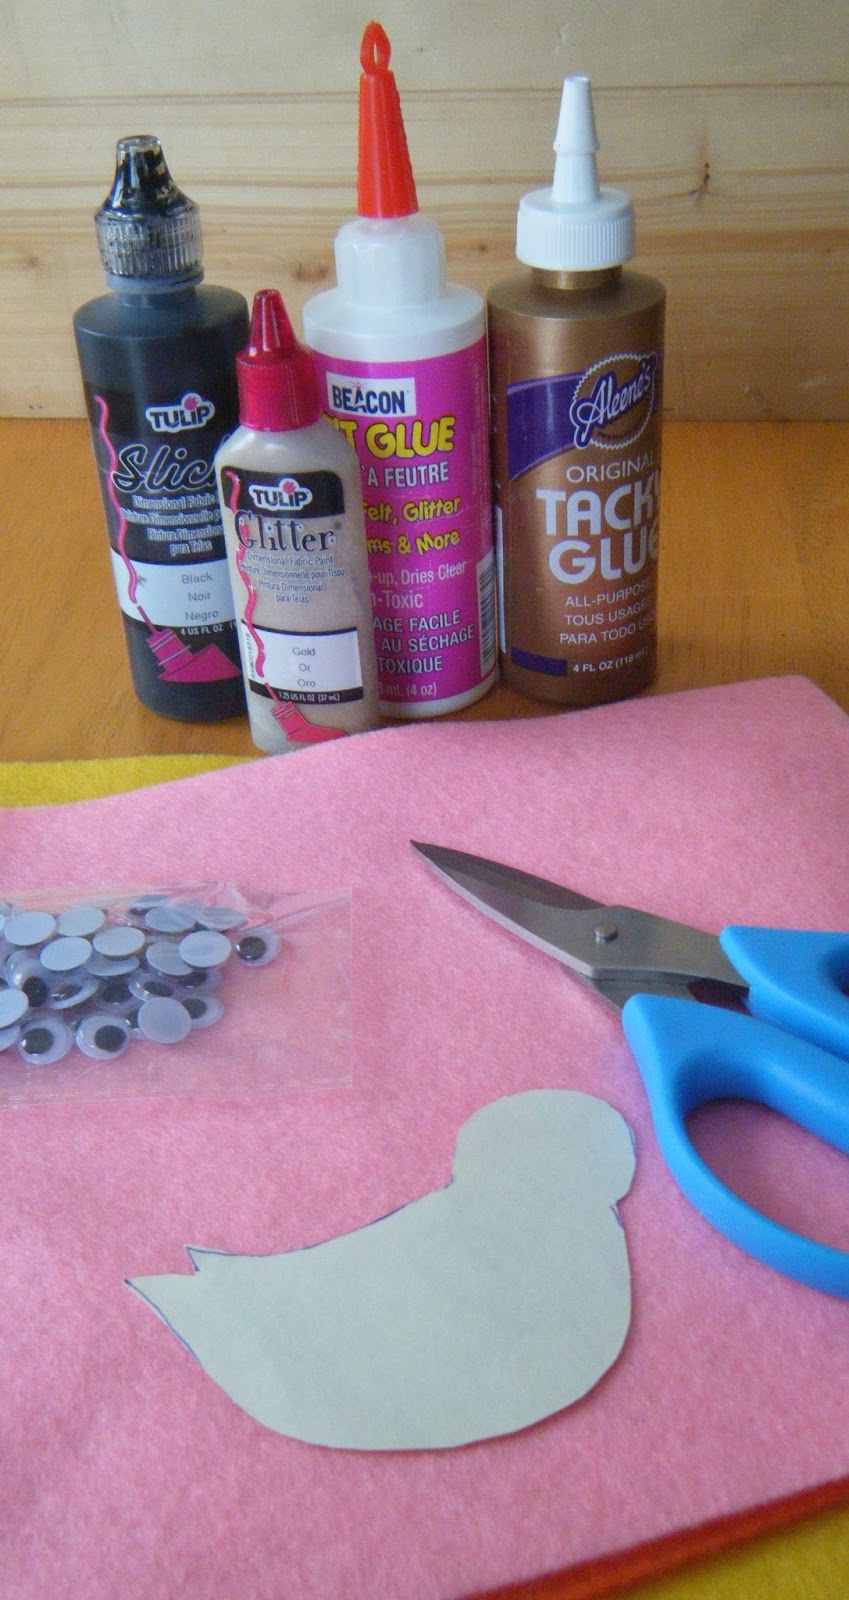 Fabric Paper Glue: Fabric, Paper, Glue, and Other Essential